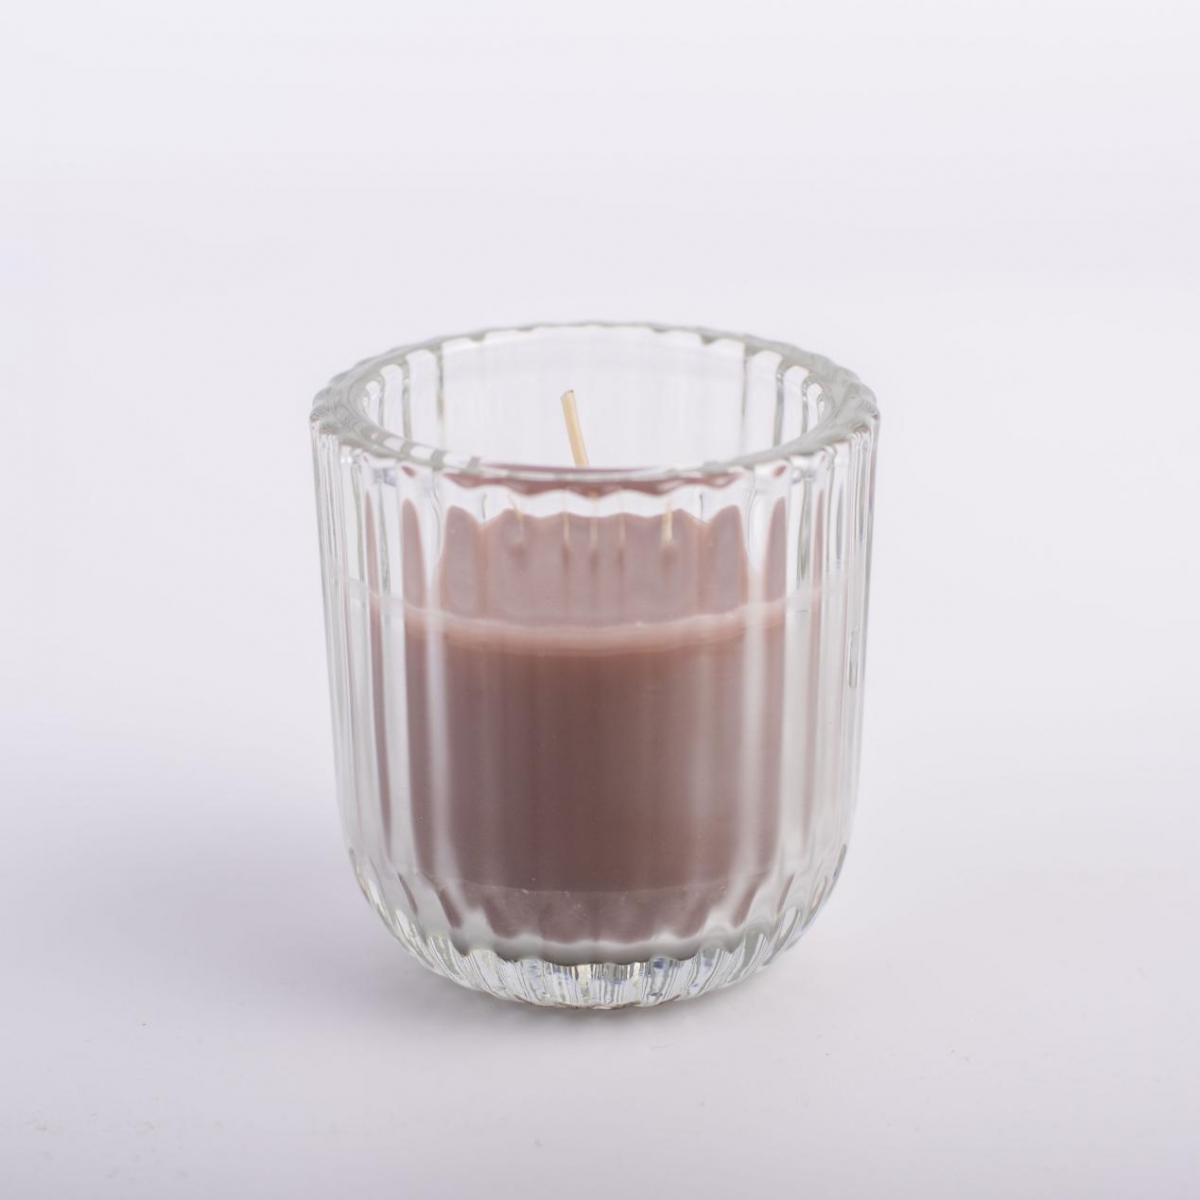 Vegan Candles – Soy Wax ,Natural Fragrance Oils , Crystal Candle Jar ,China Factory , Good Price-HOWCANDLE-Candles,Scented Candles,Aromatherapy Candles,Soy Candles,Vegan Candles,Jar Candles,Pillar Candles,Candle Gift Sets,Essential Oils,Reed Diffuser,Candle Holder,